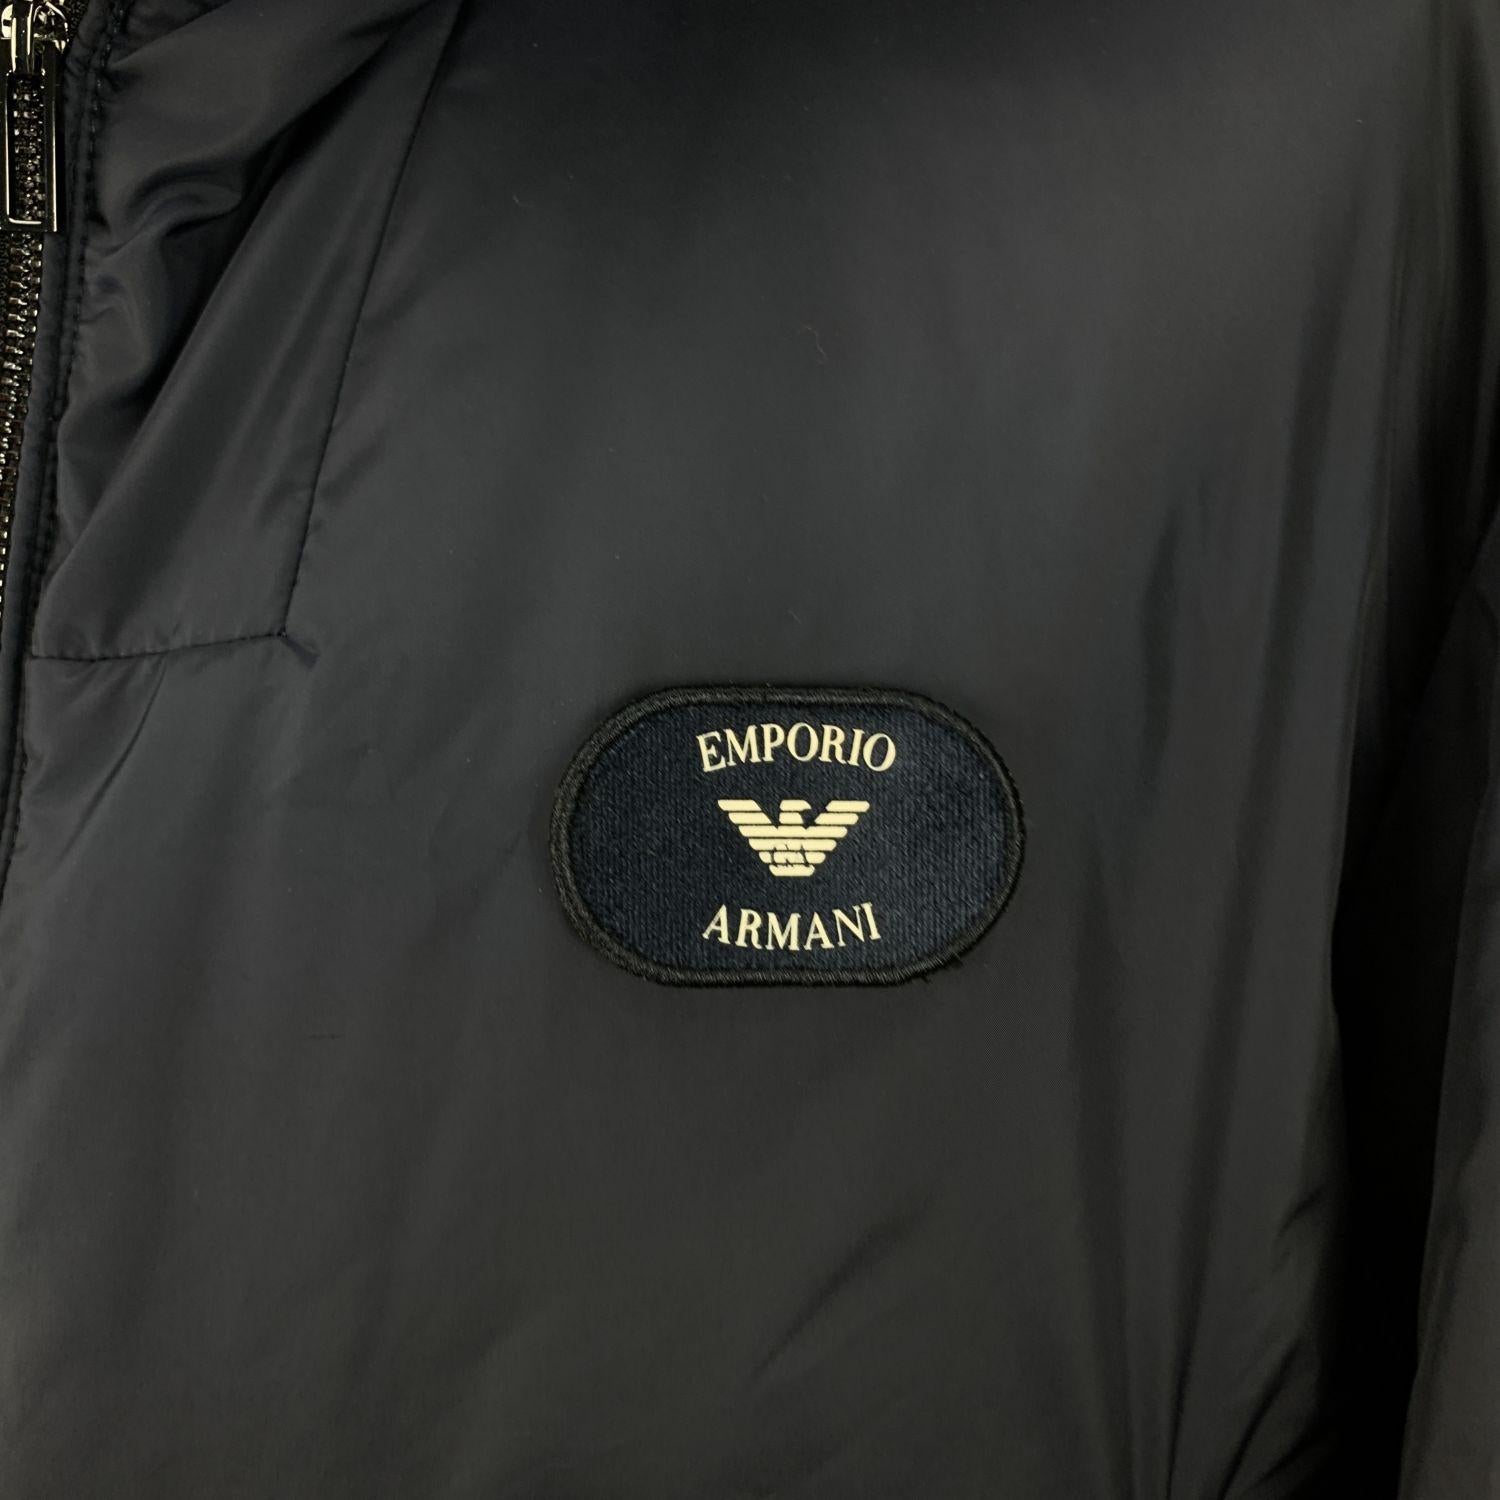 Emporio Armani blue padded hooded jacket. Built-in suspenders. Polyester padding. Front zip closure. Composition: 100% Polyester. 2 zip pockets on the waist. Size: XXL (The size shown for this item is the size indicated by the designer on the